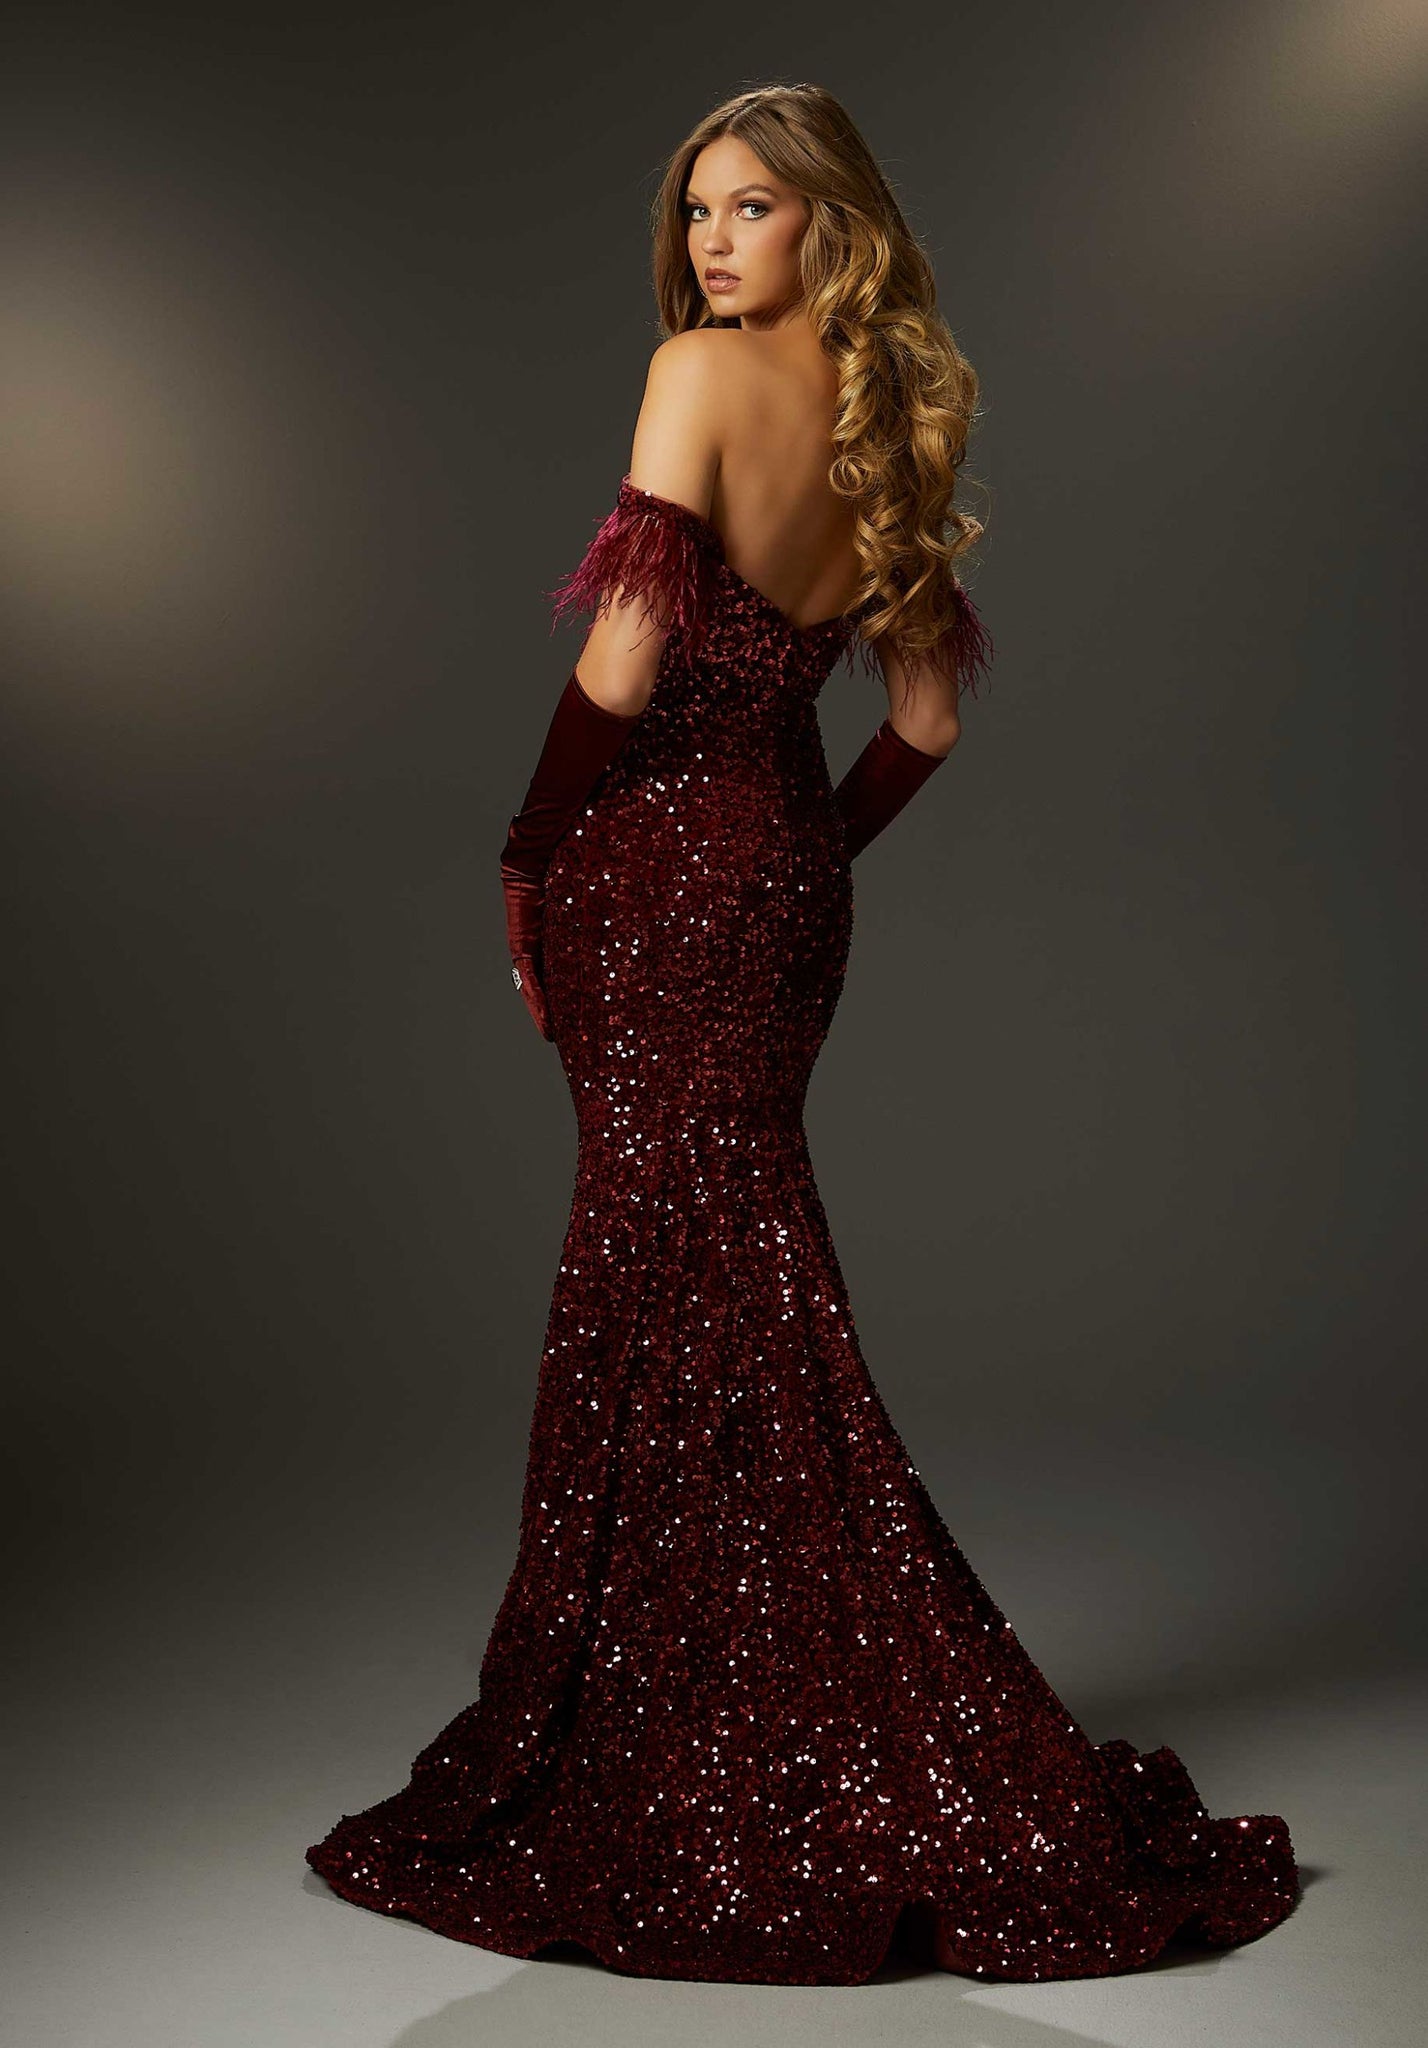 Steal the show in haute long dress 48021 by Morilee. This dress is marvelous with stunning combinations of feathers and sequins. The fitted cut of this dress is made from a velvet sequin fabric that will hug and flatter your natural figure while giving you the perfect amount of sparkle. The strapless neckline pairs hand in hand with the off the shoulder feathered cap sleeves. Gloves not included, but can be accessorized with.